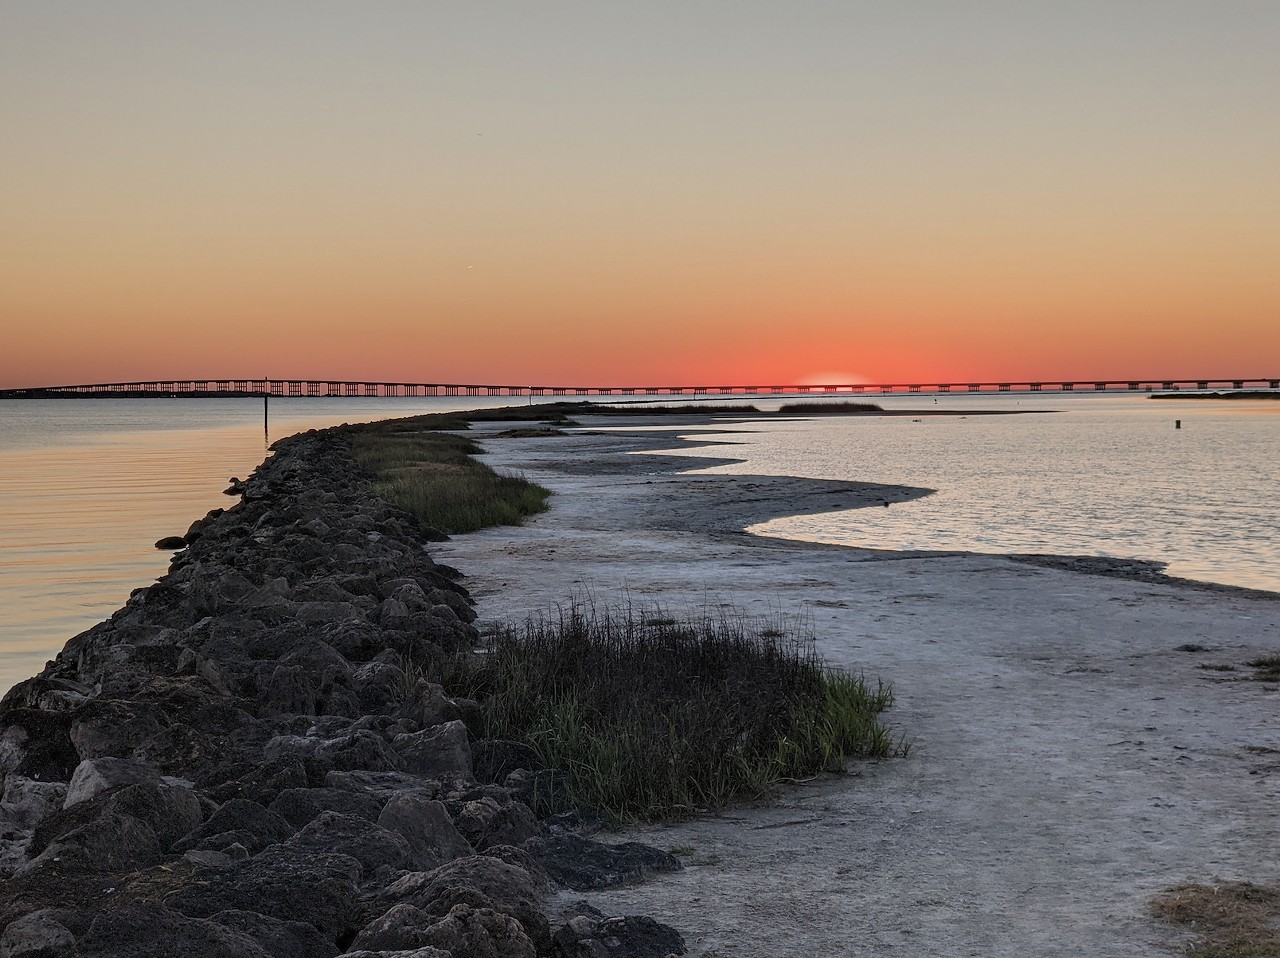 Goose Island State Park
202 S. Palmetto St., Rockport, (361) 729-2858, tpwd.texas.gov
Goose Island State Park is a great choice for nature lovers who want to hit up the coast. Fishing enthusiasts in particular can enjoy the 1,620-foot-long pier.